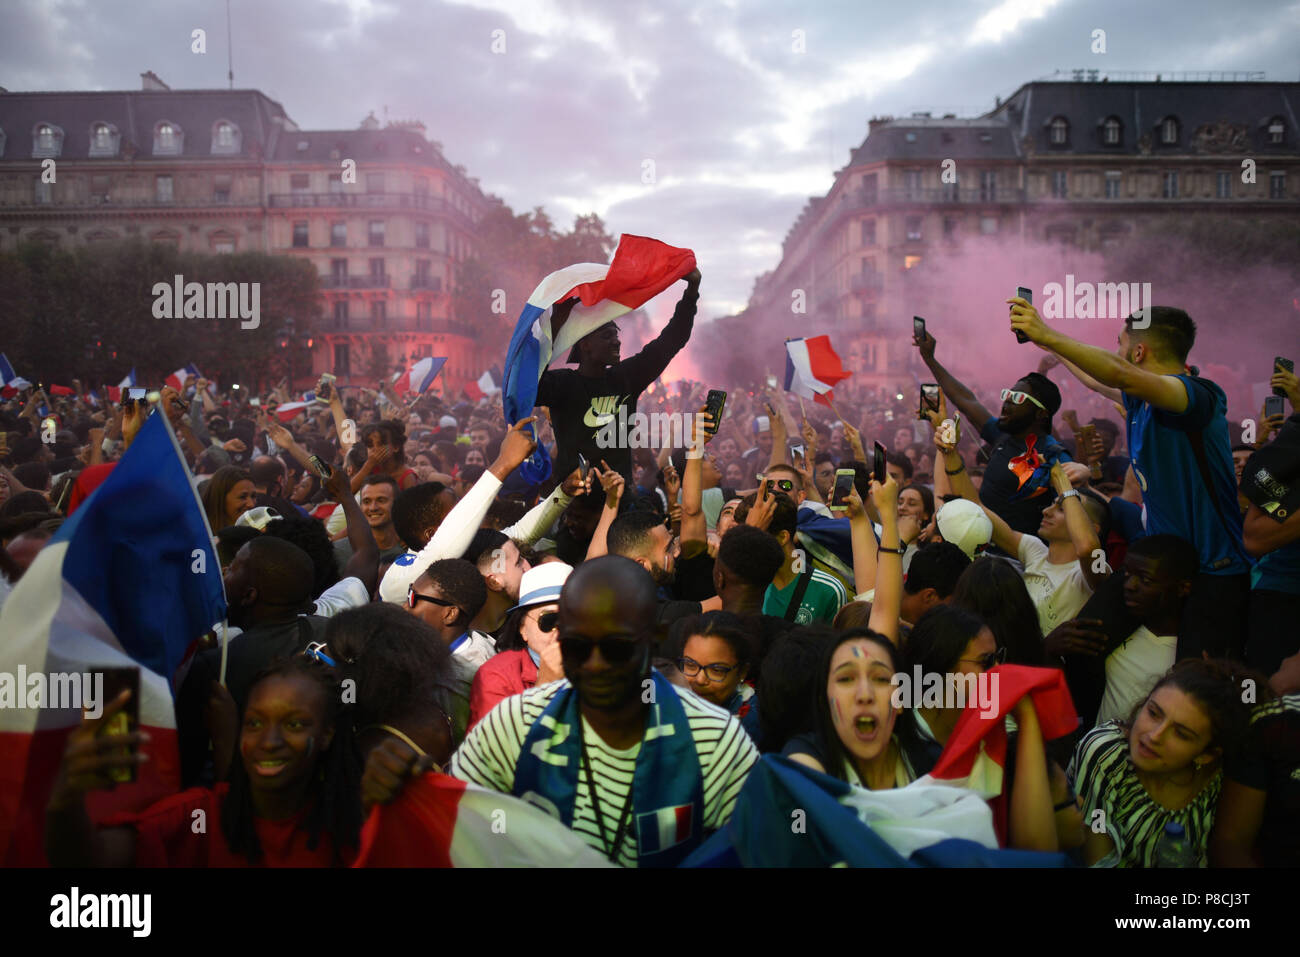 July 10, 2018 - Paris, France: Supporters of the French football team  celebrate after France beat Belgium 1-0 to reach the World Cup final. Des  supporters de l'equipe de France de football